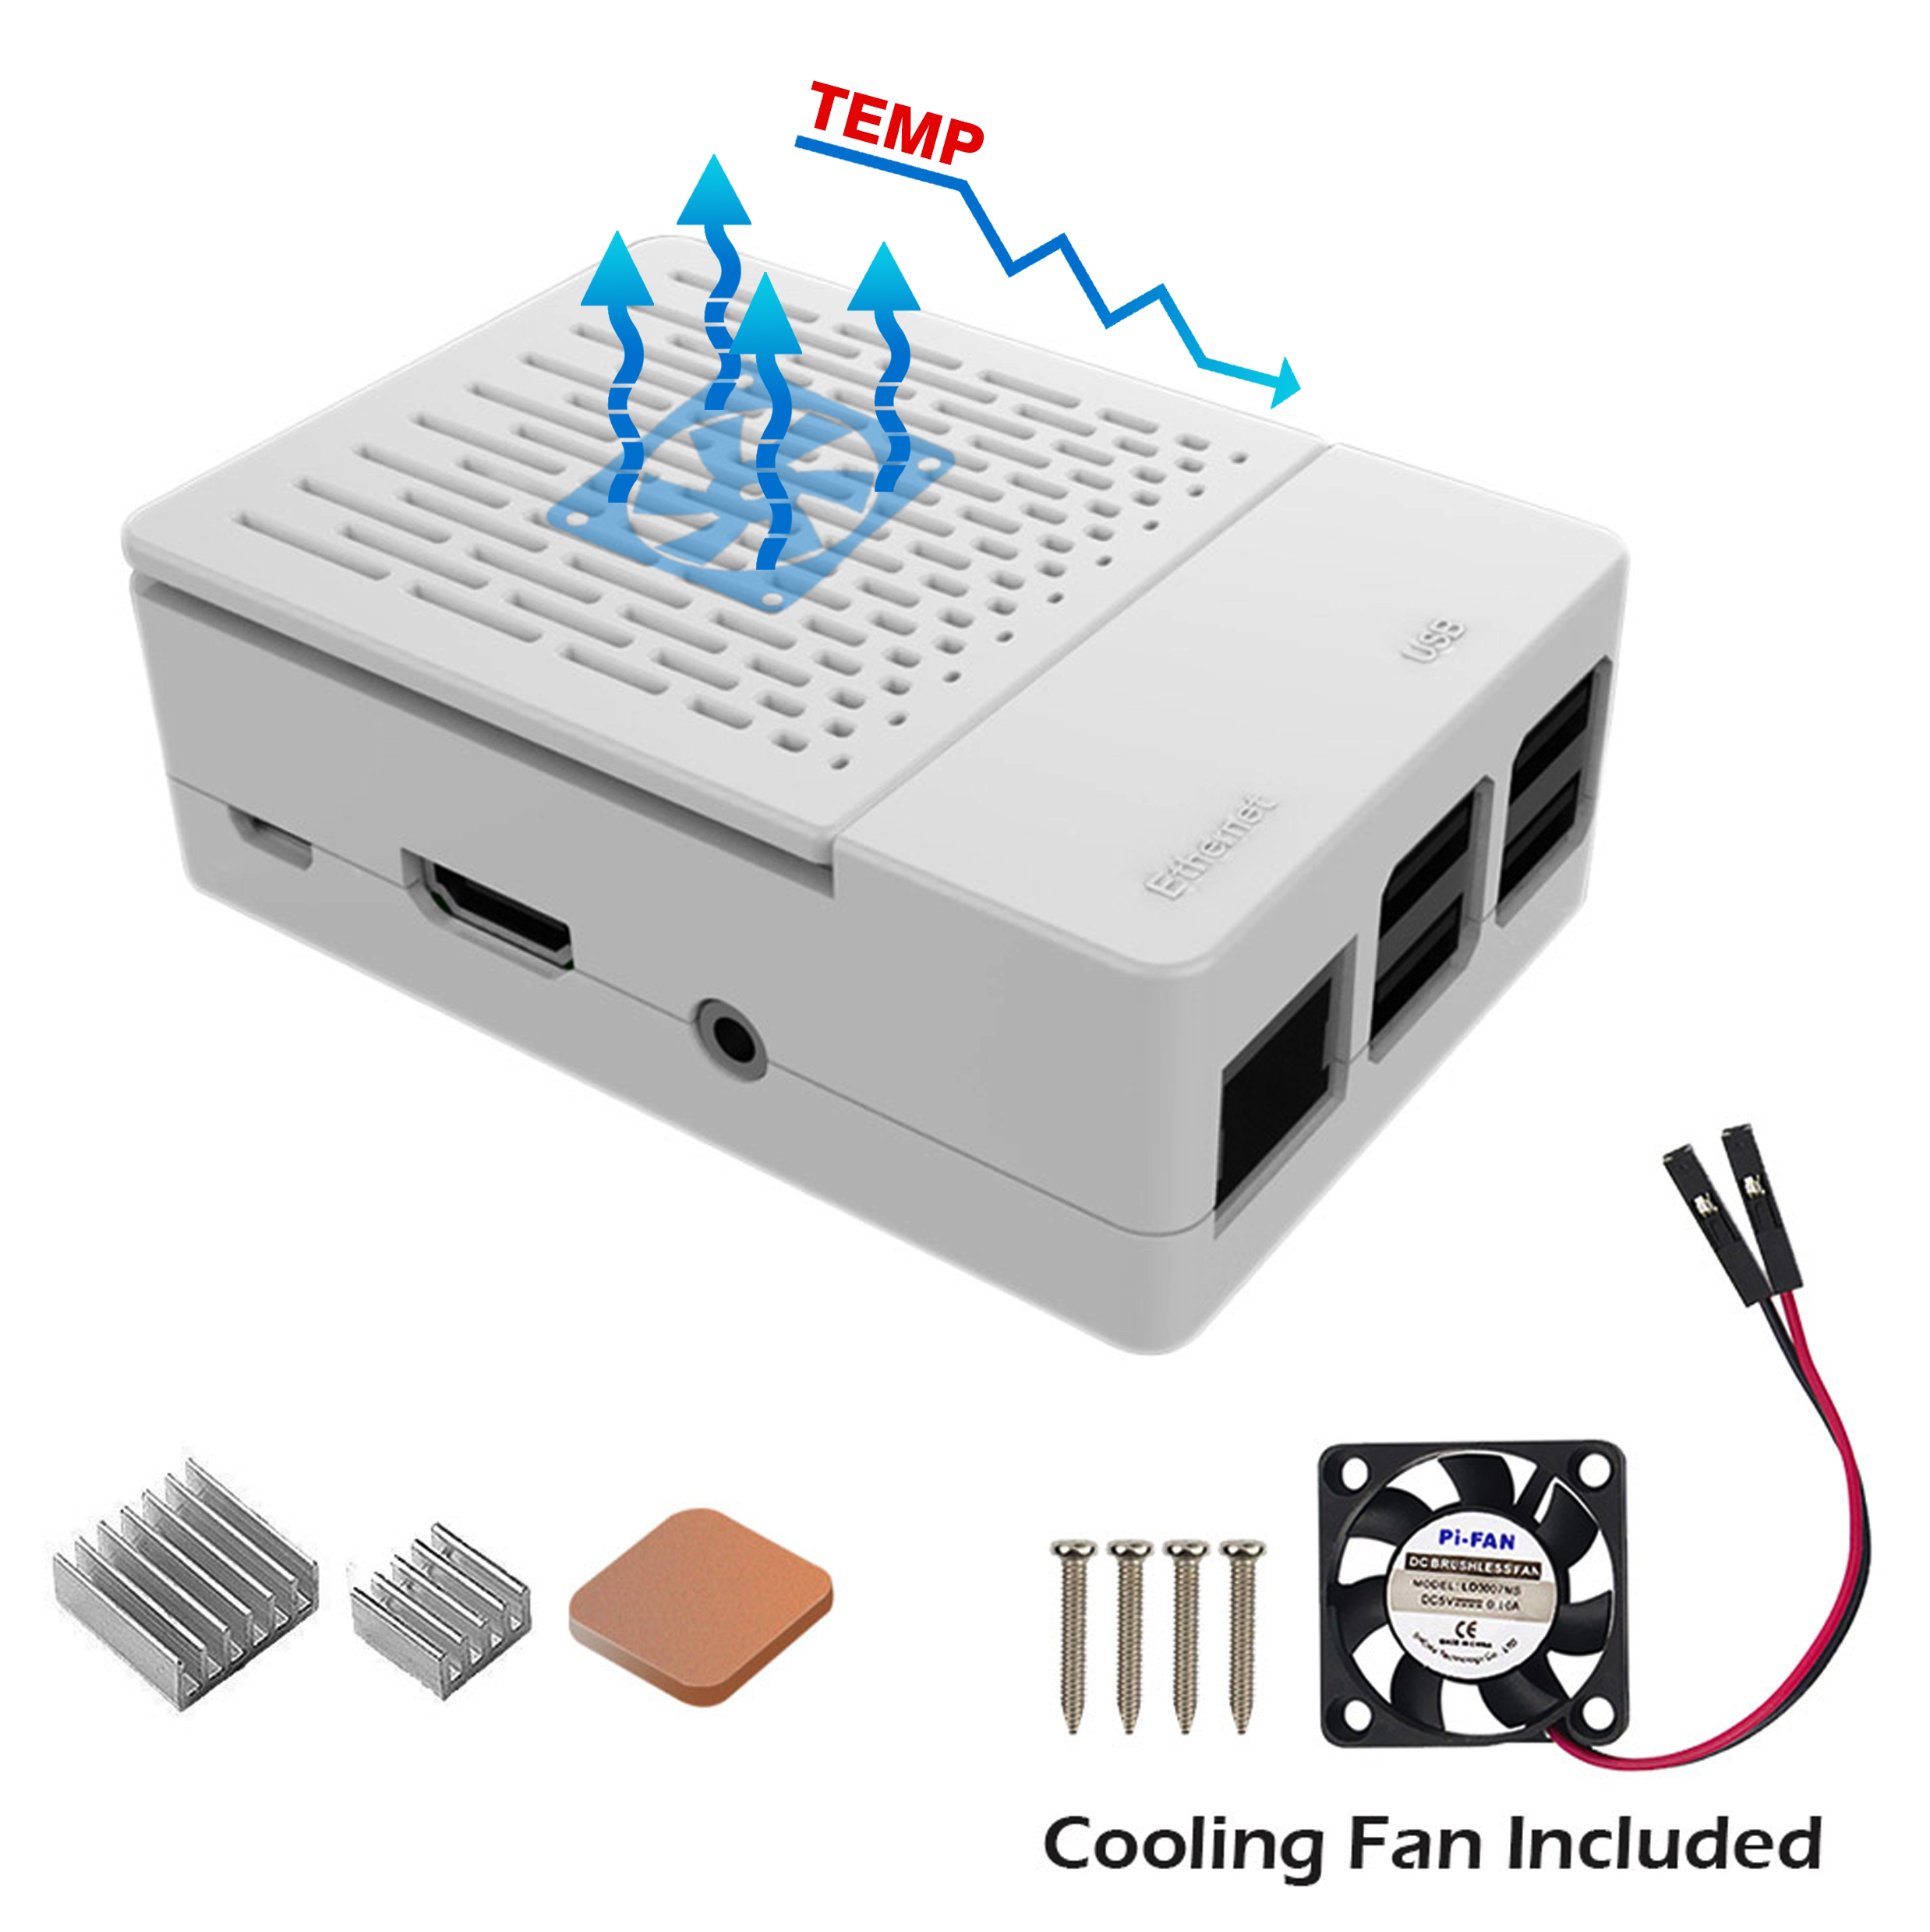 Black/White Assembled Exclouse Case + Quiet Cooling Fan + Heatsink Support GPIO or Camera For Raspberry Pi 3/2/B+ 9